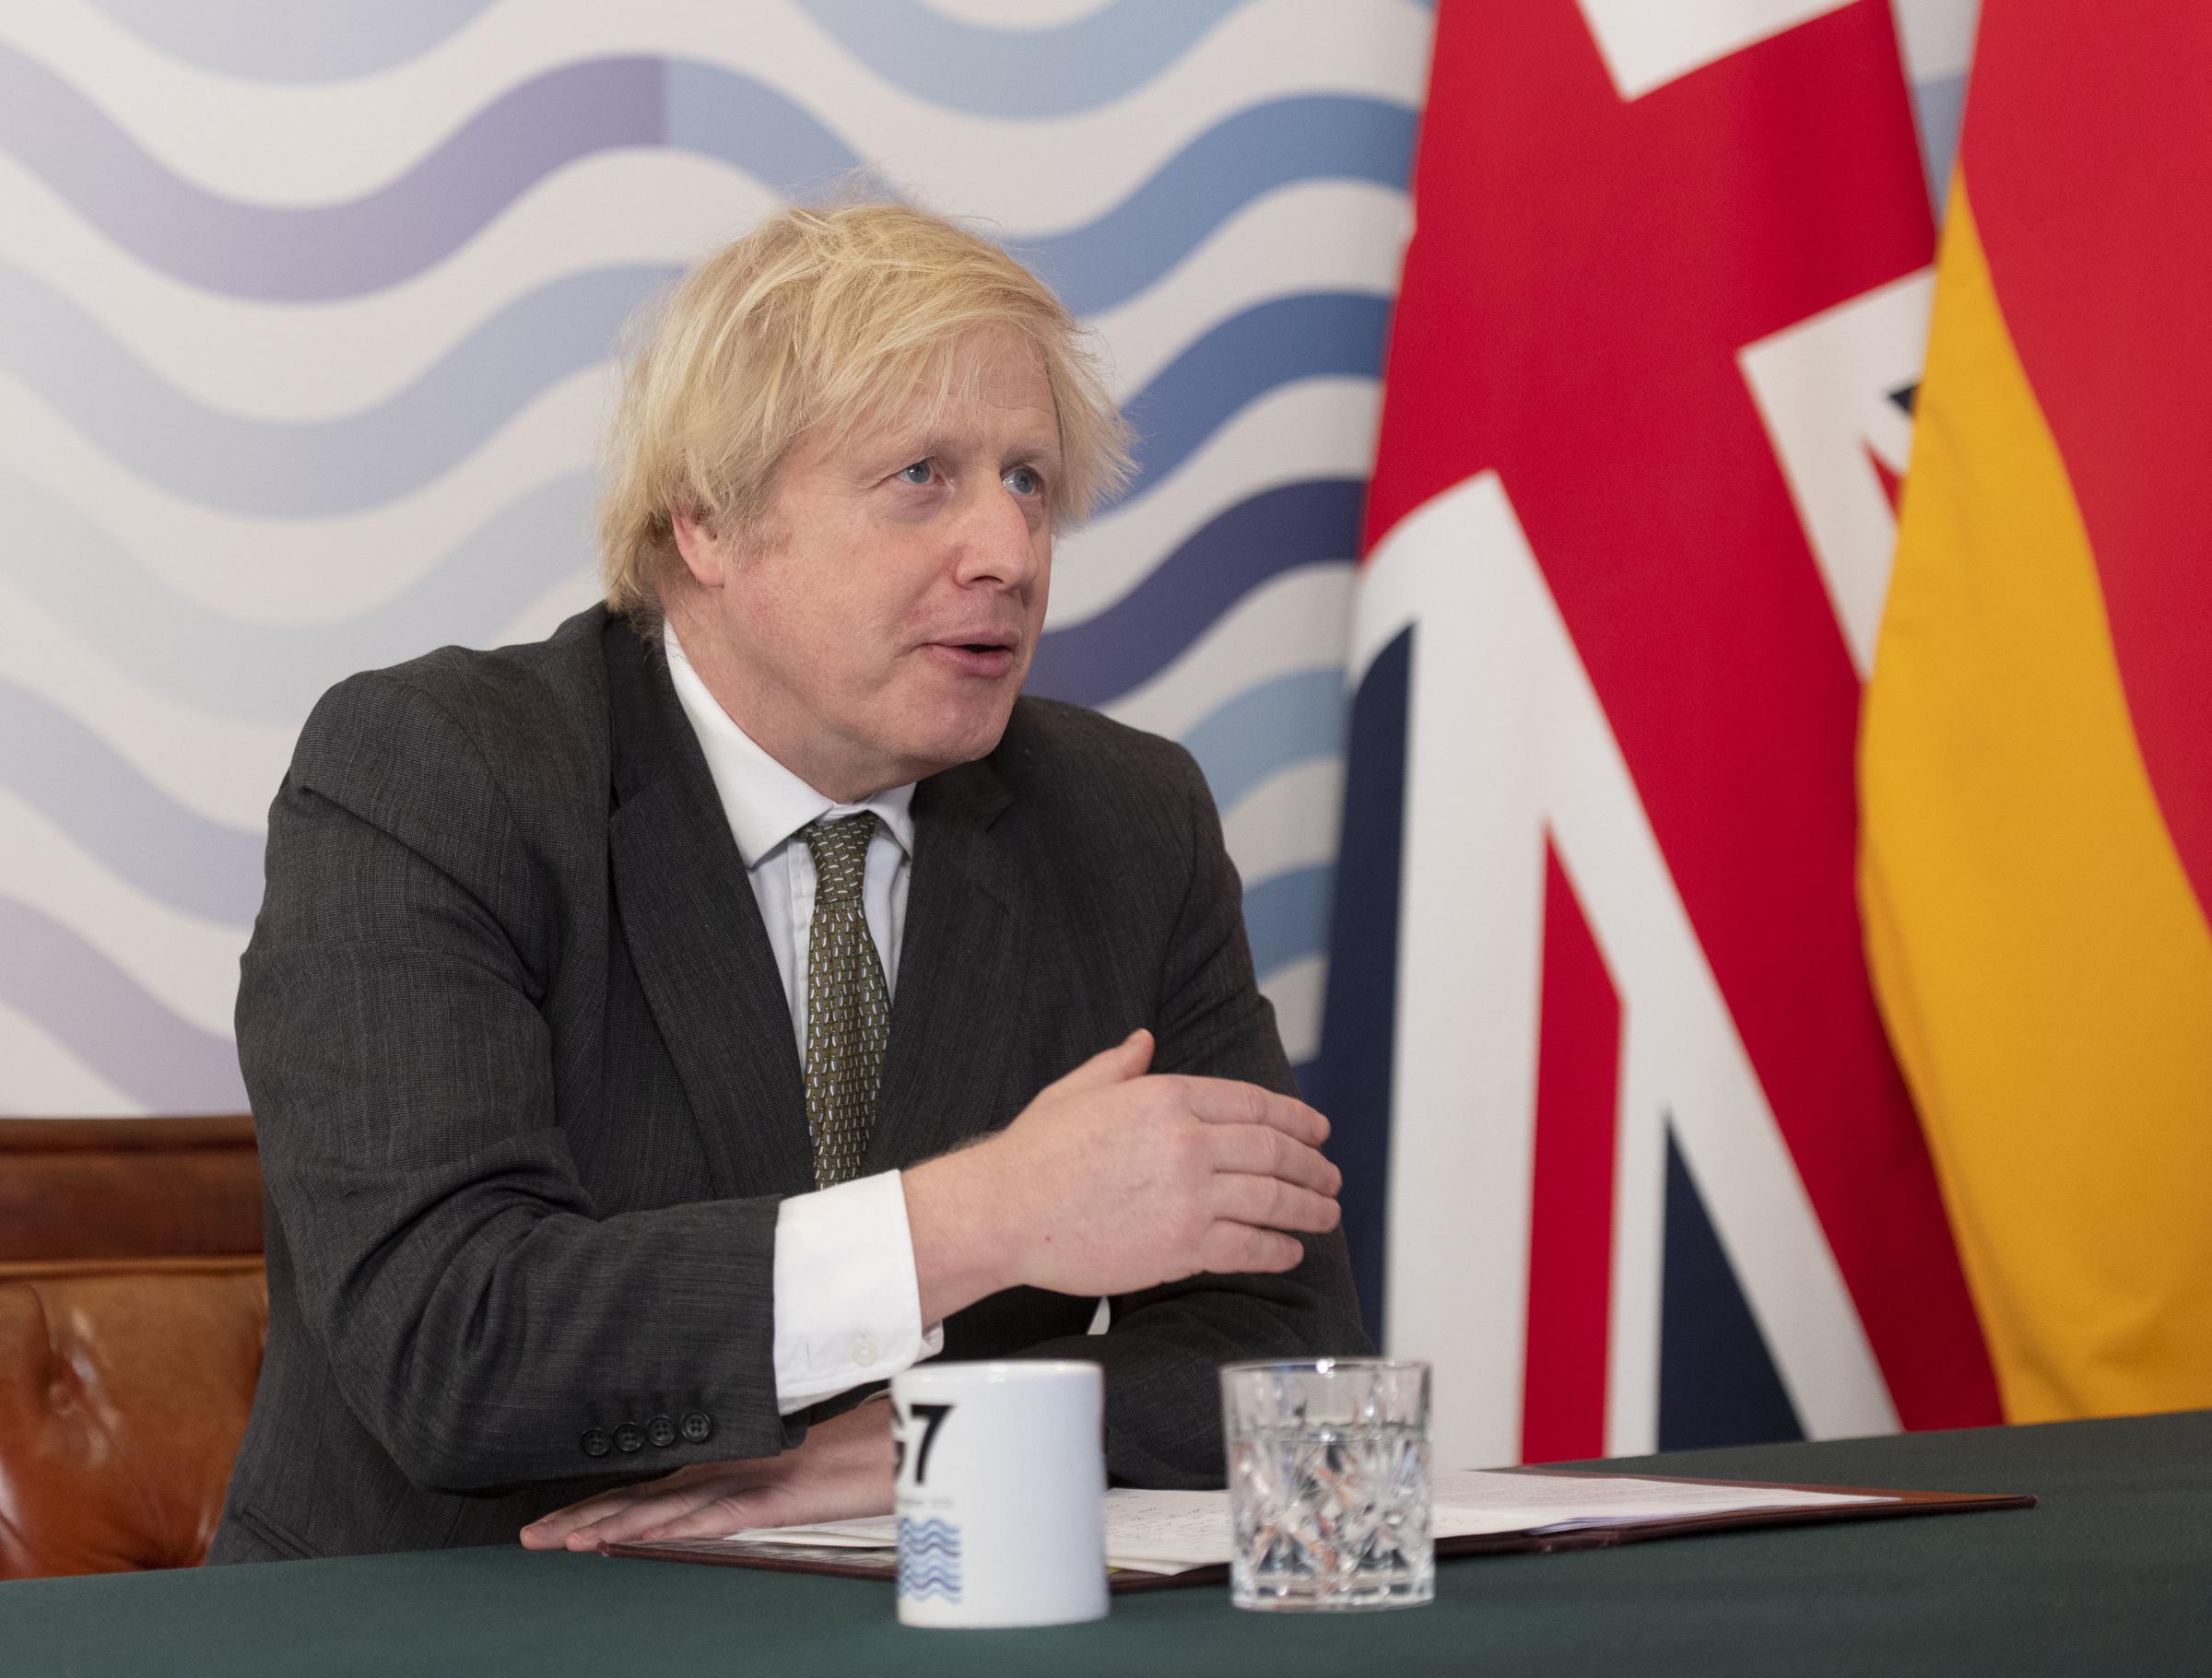 Prime Minister Boris Johnson in the Cabinet Room, Downing Street, London, hosting the G7 leaders for a virtual meeting to discuss worldwide distribtuion of coronavirus vaccines and preventing future pandemics. Picture date: Friday February 19, 2021. PA Ph